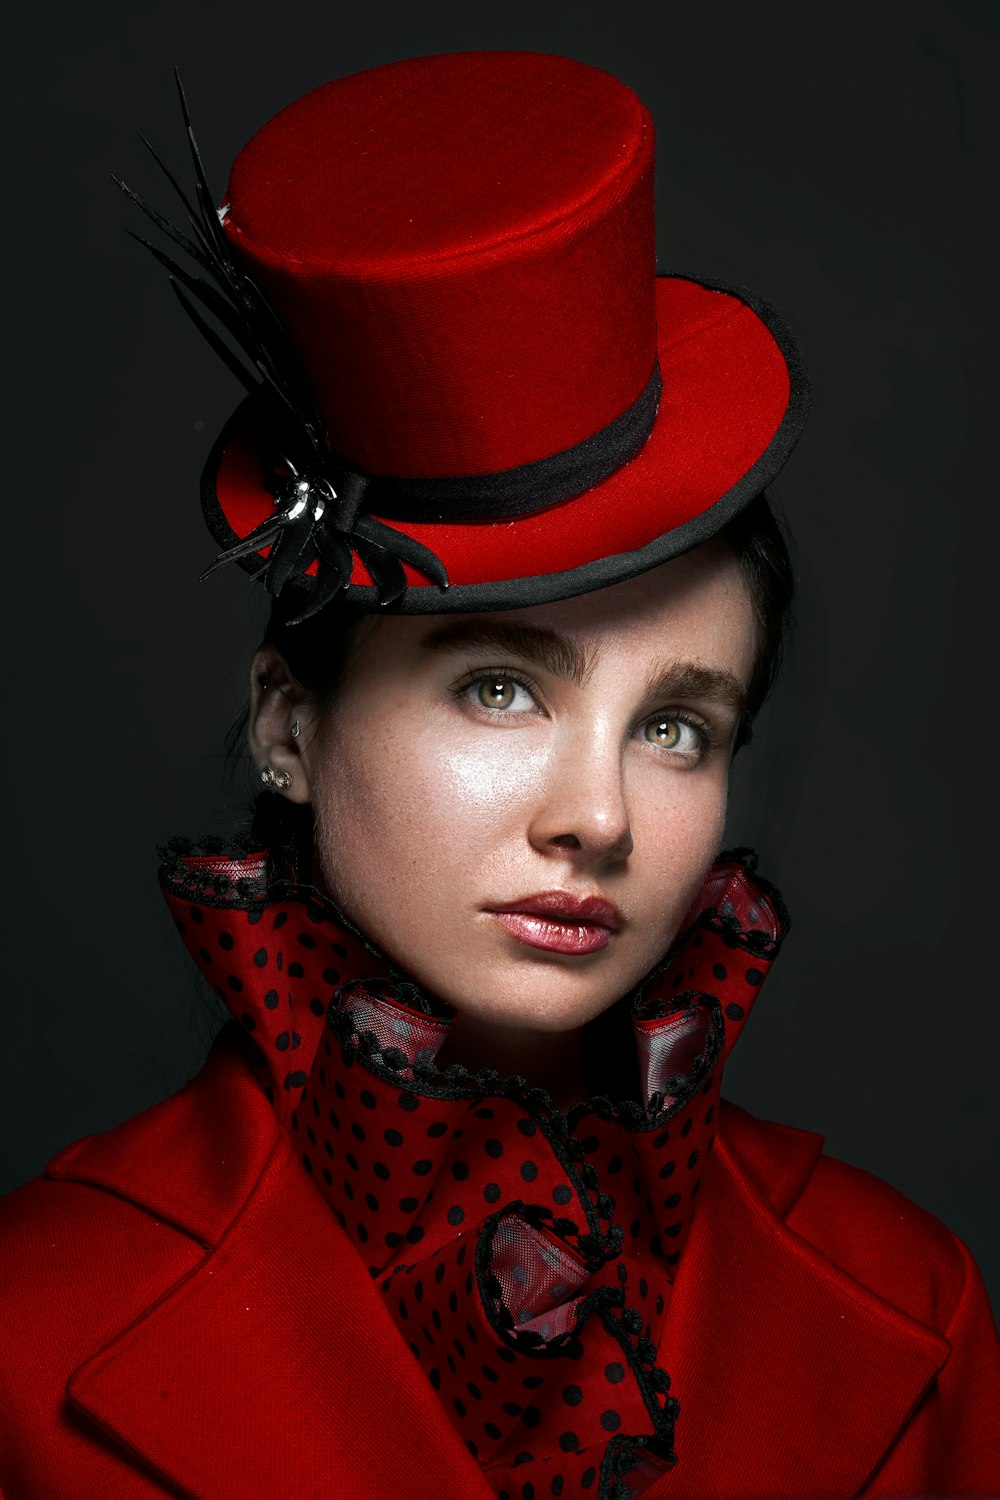 a woman wearing a red coat and a red hat